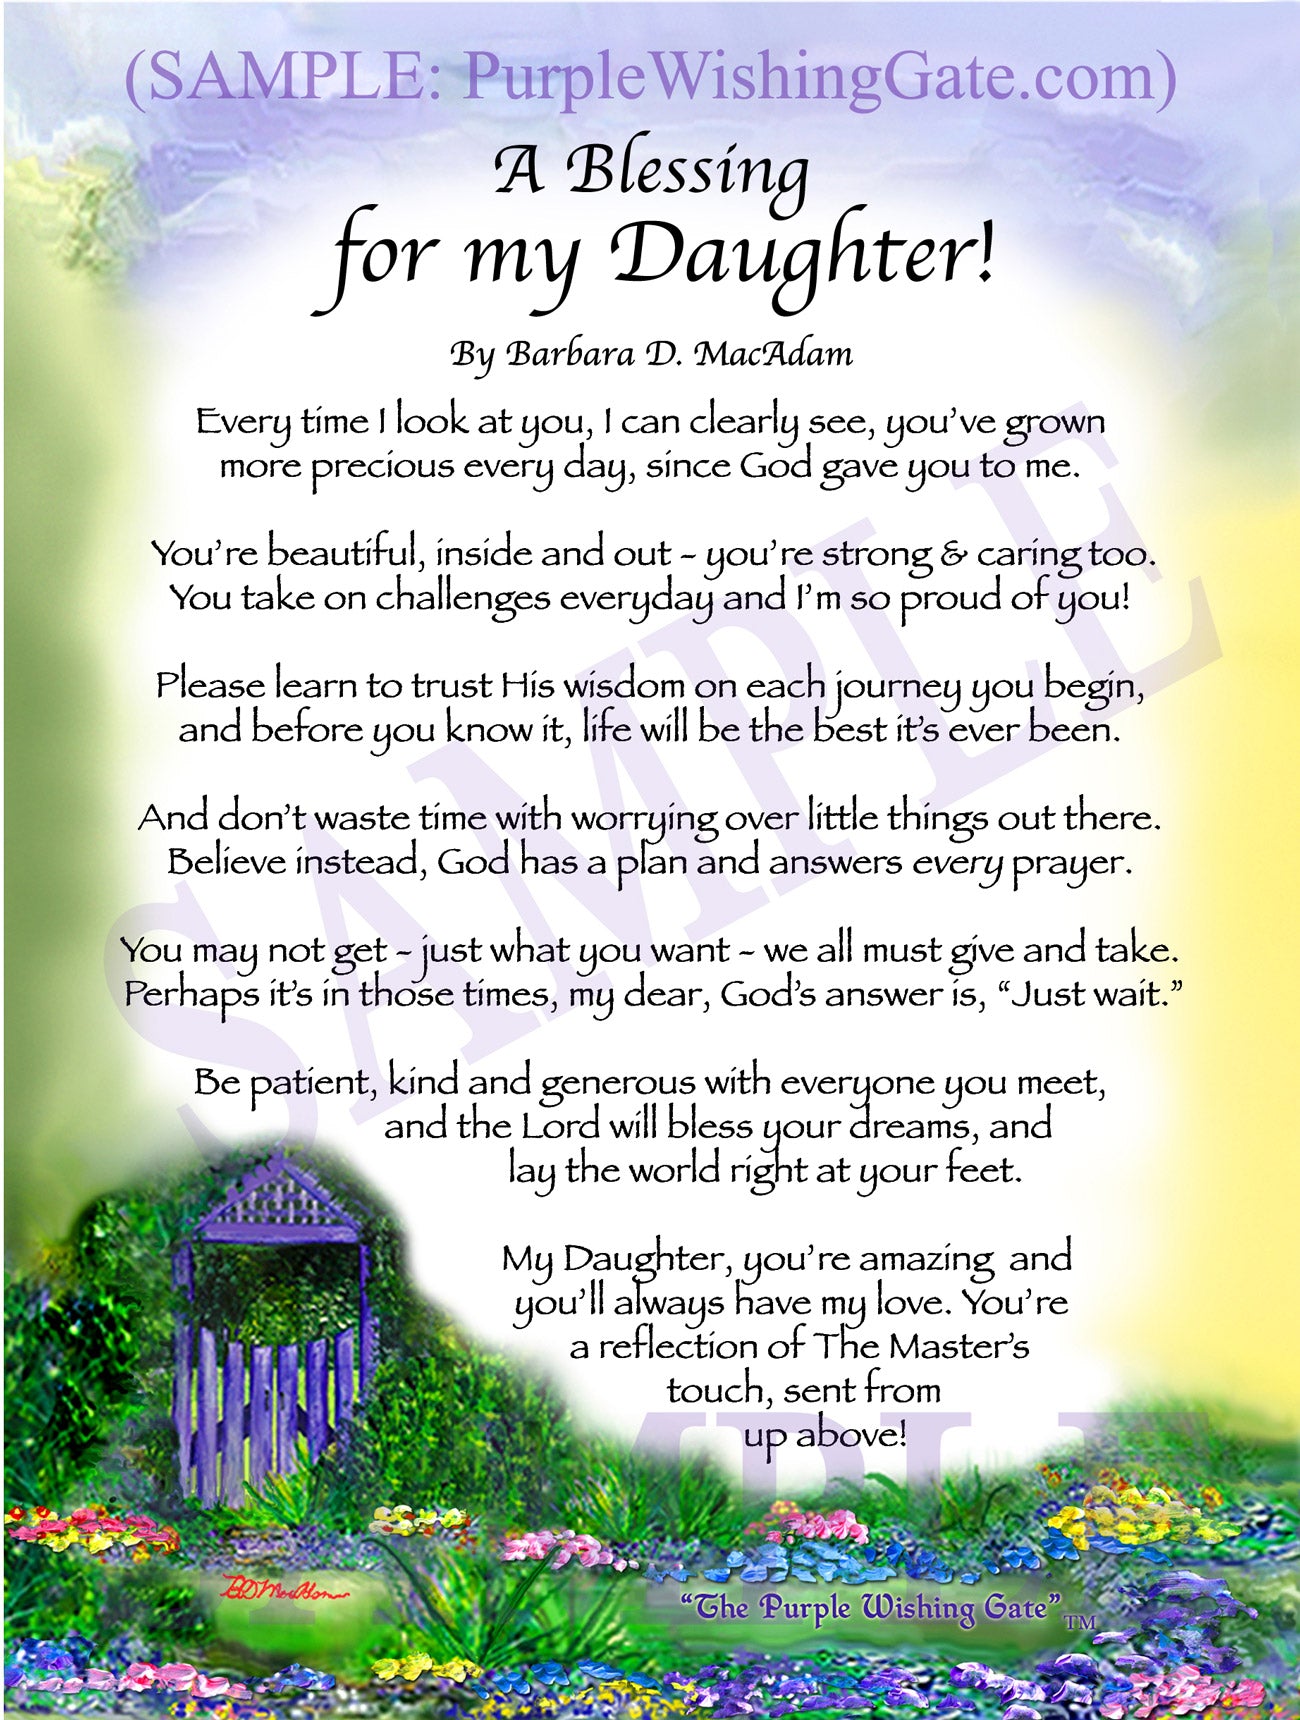 A Blessing for My Daughter: Personalized Gift!